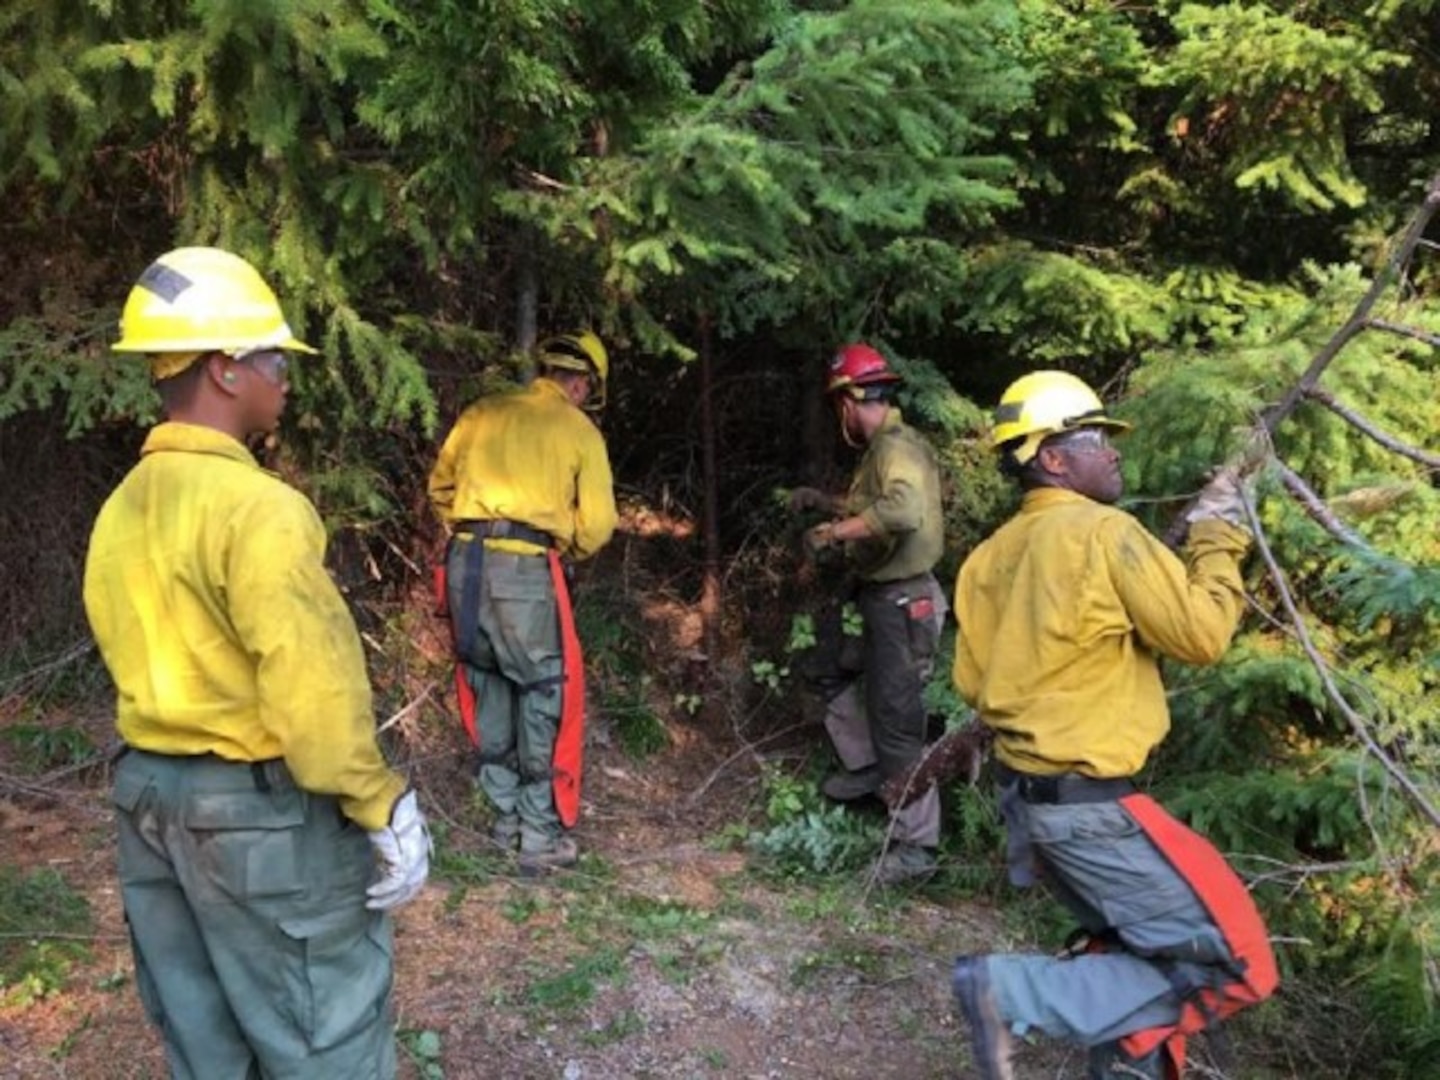 Several U.S. Army Soldiers clear brush in support of wildland firefighting efforts by the National Interagency Fire Center. Over the last three years, U.S. Army North has deployed forces to support wildland fires in Mendocino, California, and in Roseburg, Oregon.